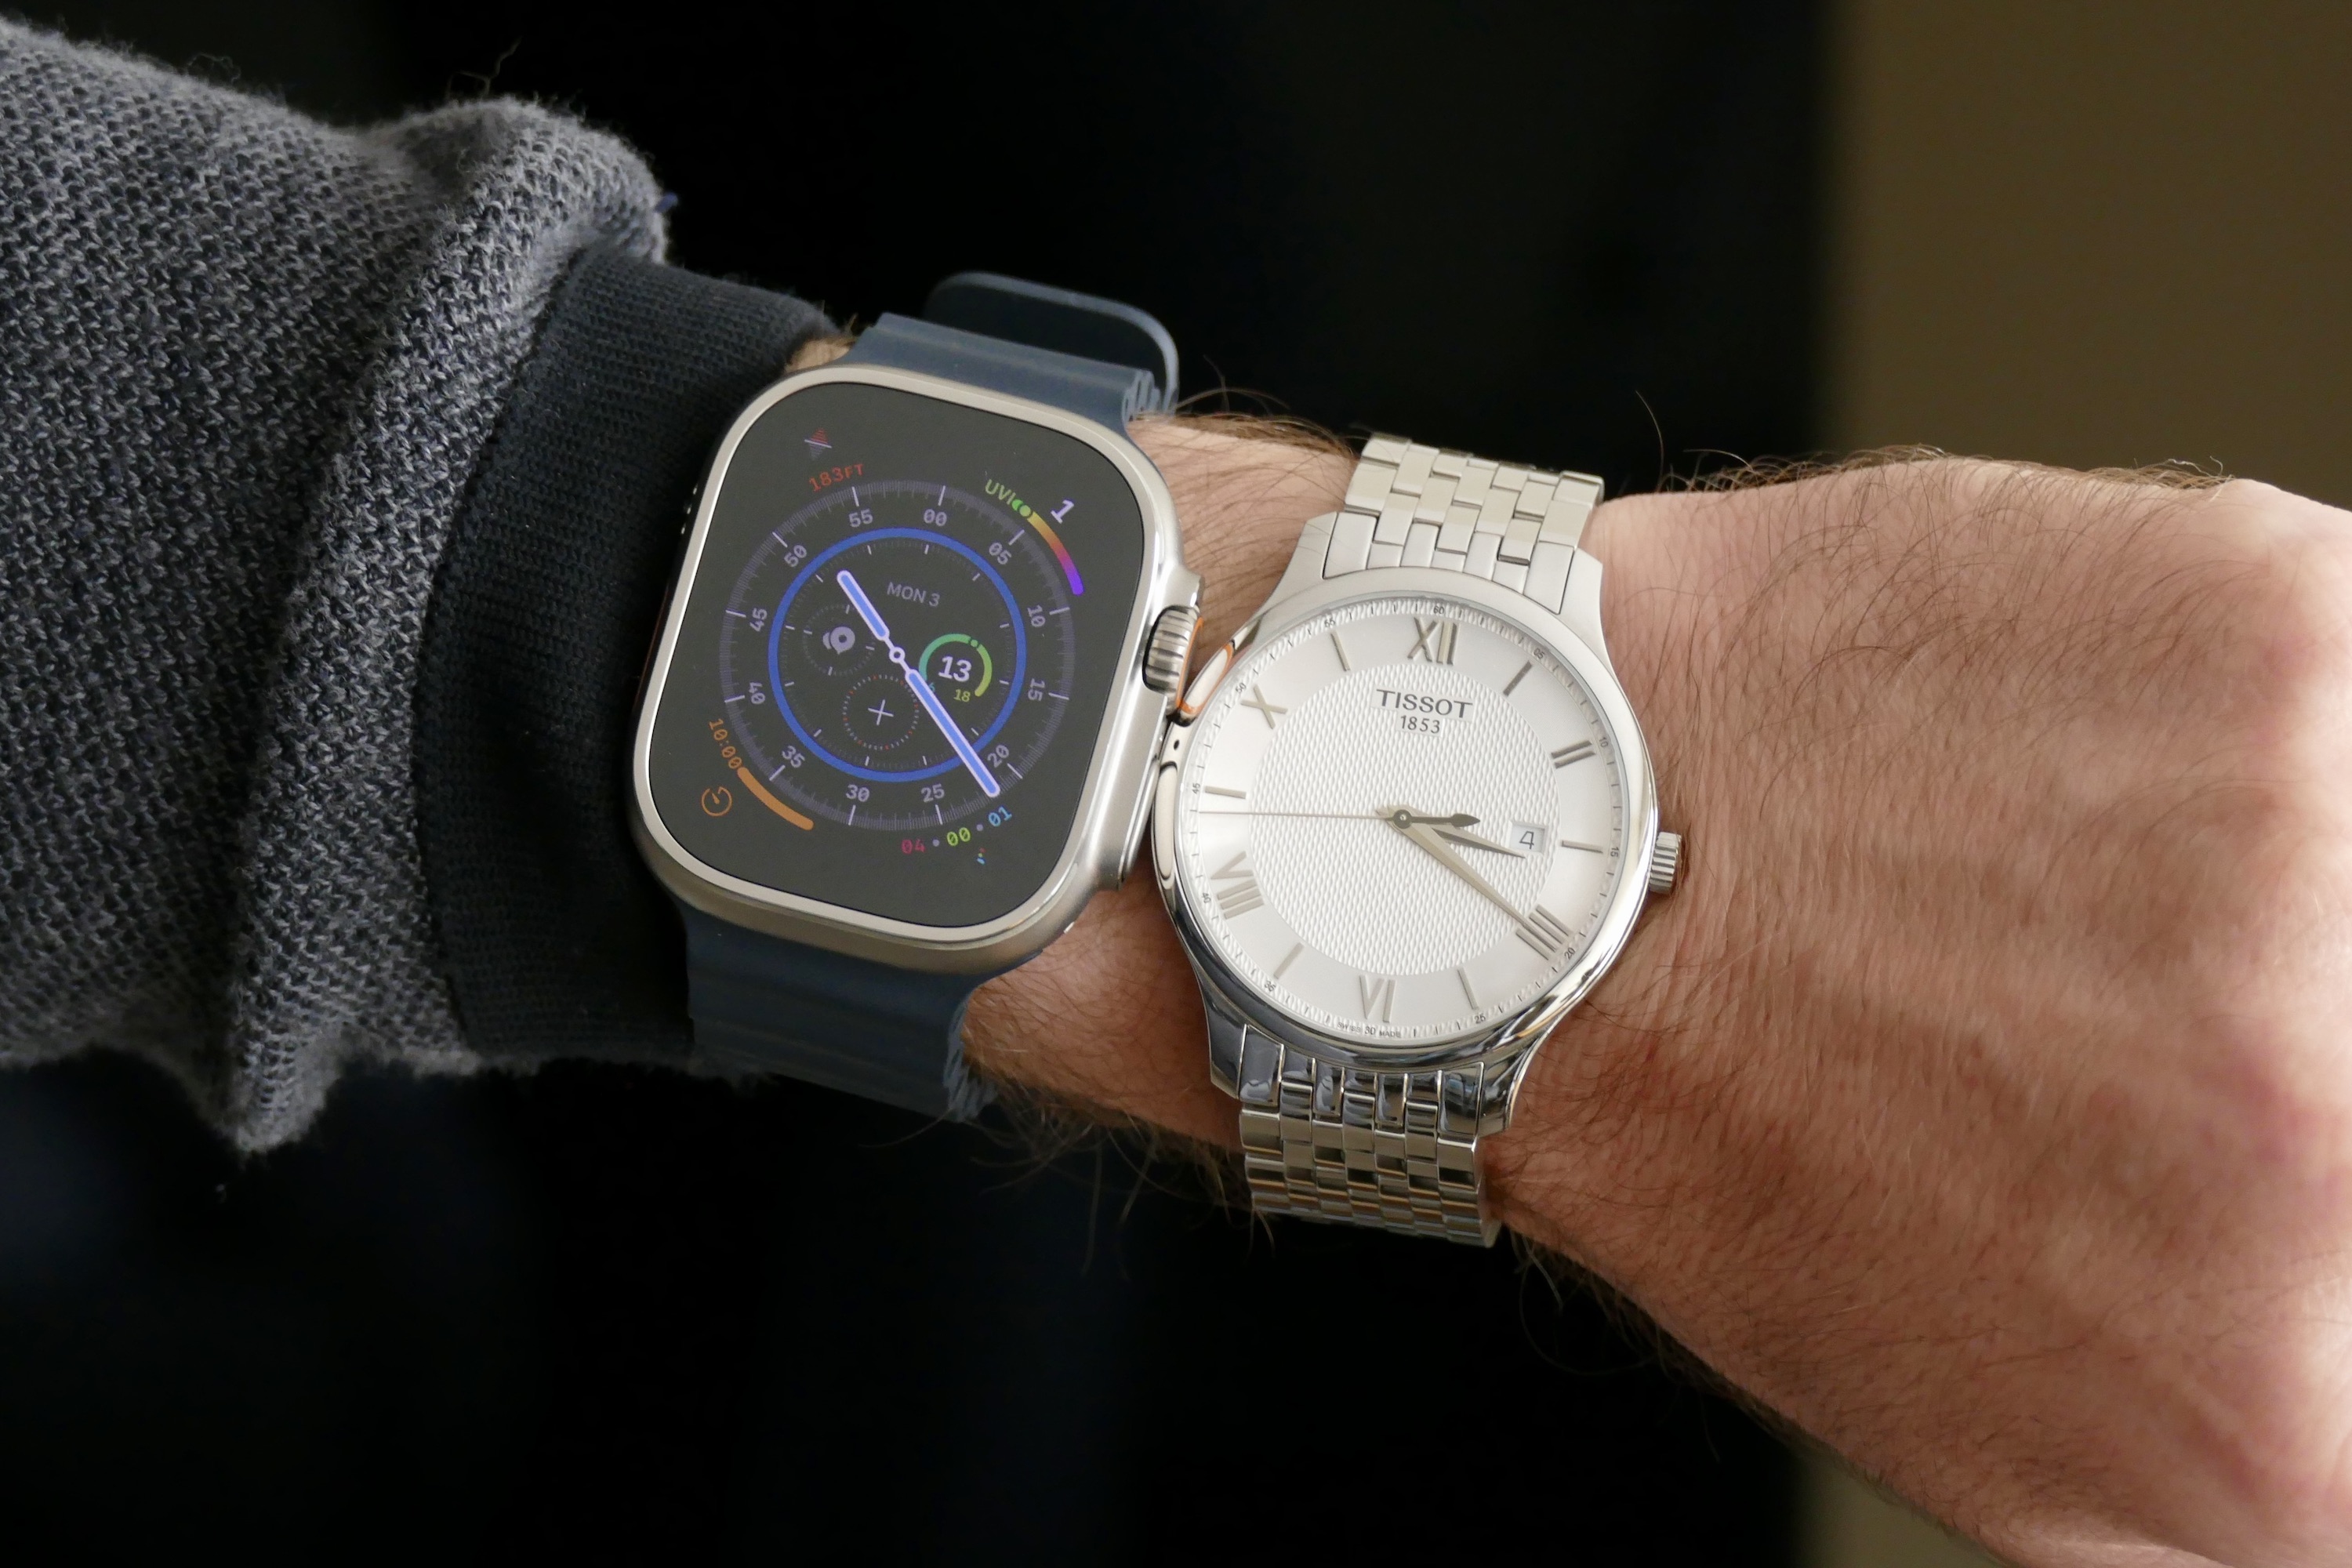 The Apple Watch Ultra and Tissot Tradition.